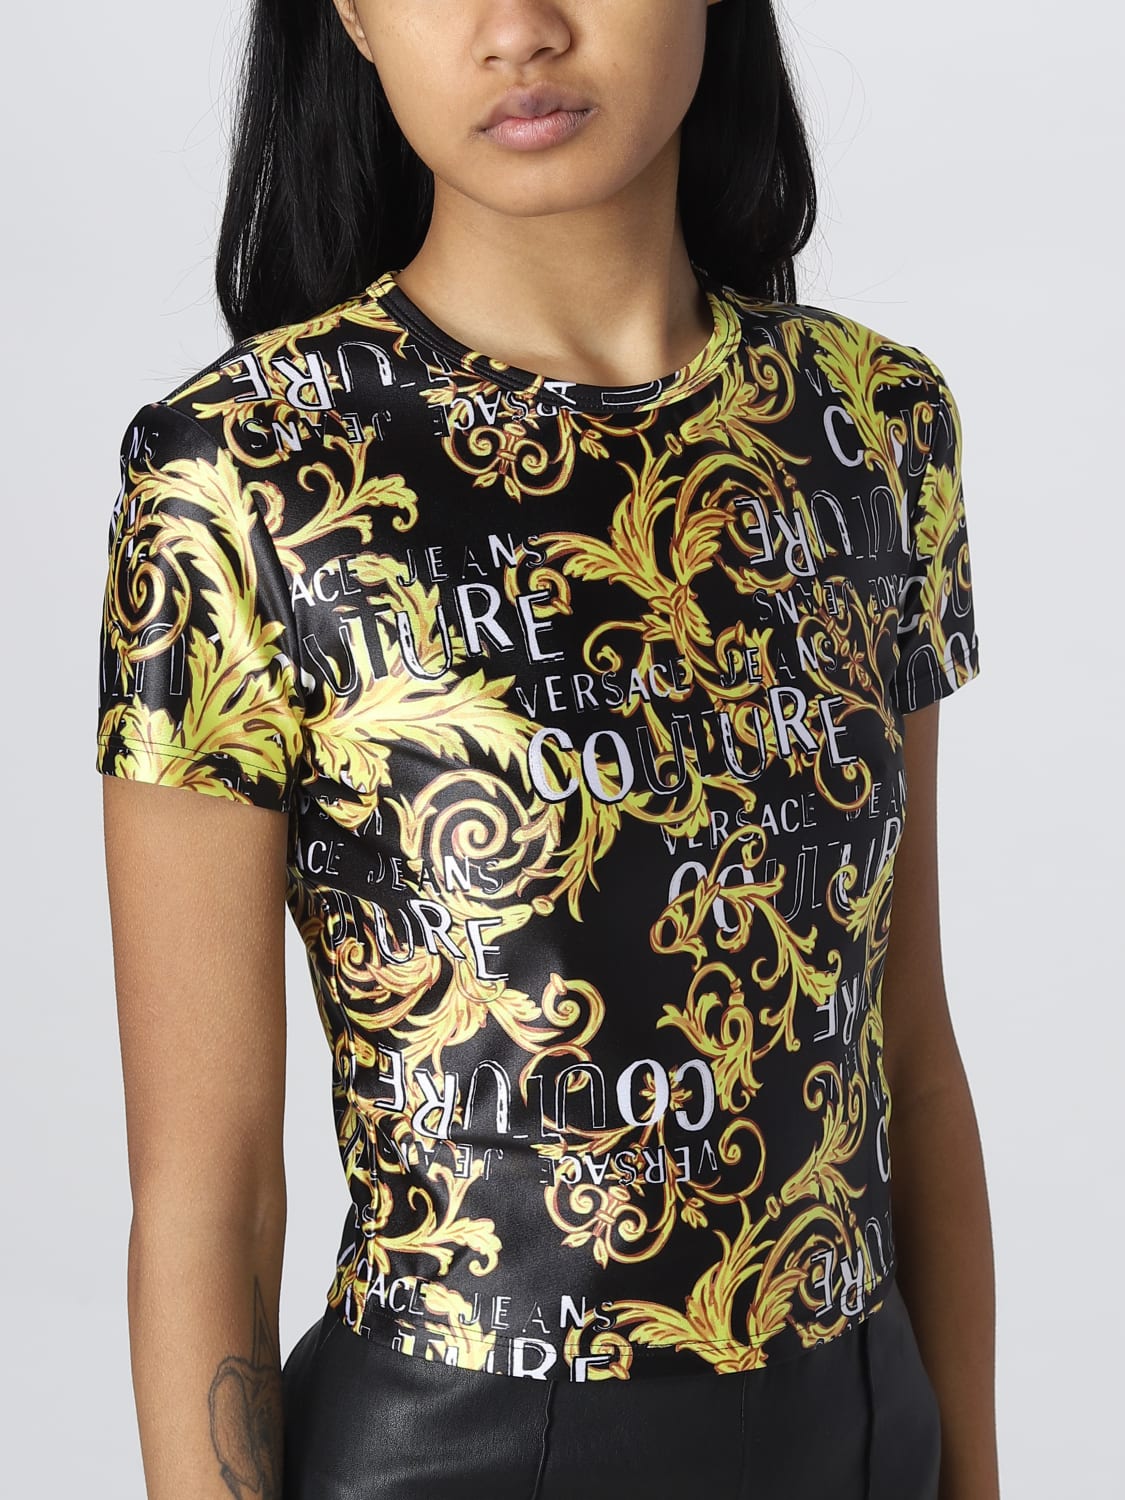 Versace Jeans Couture T-shirt in printed stretch fabric